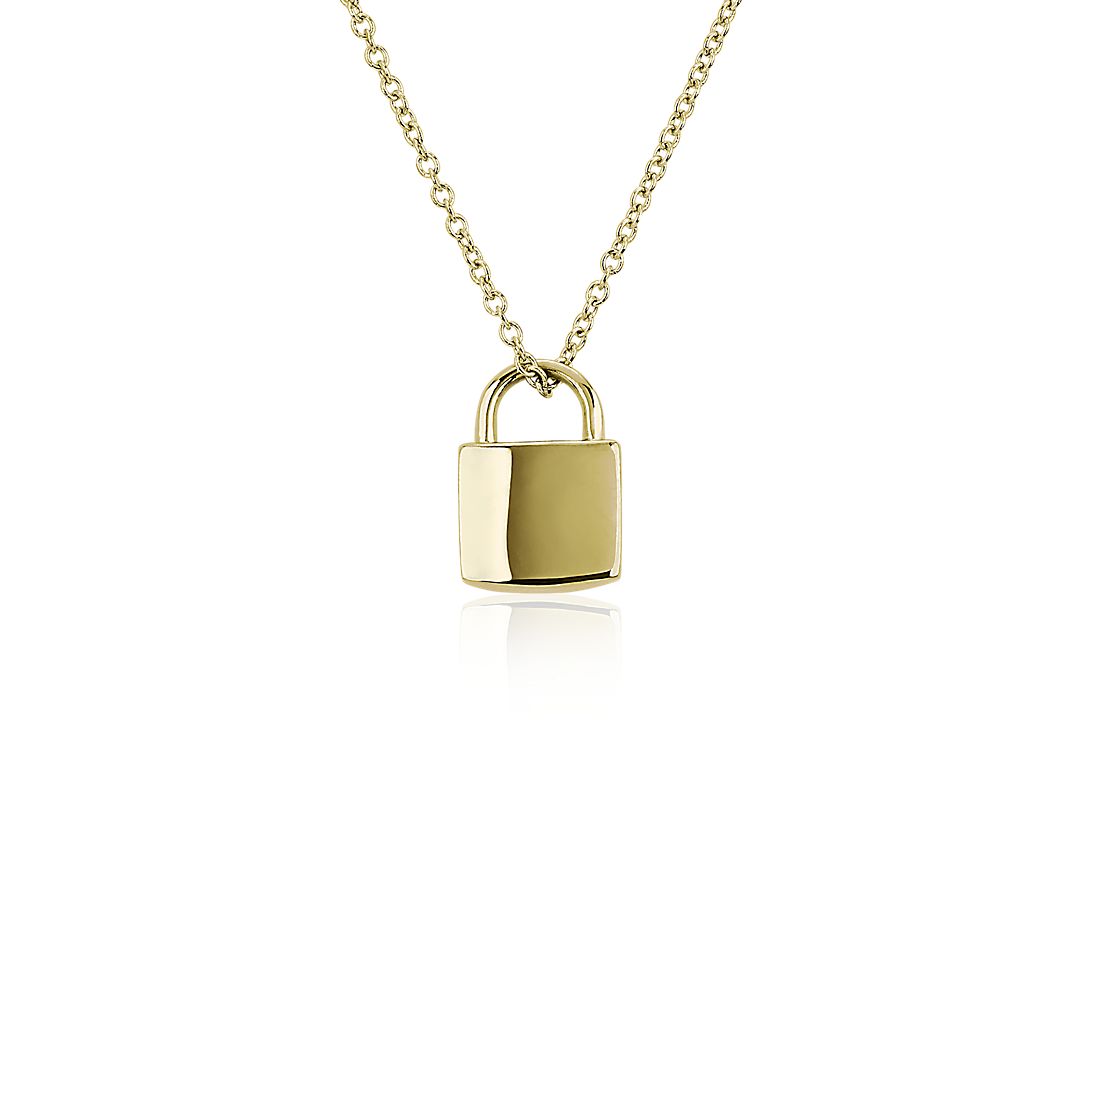 Lock Necklace in 14k Yellow Gold | Blue Nile